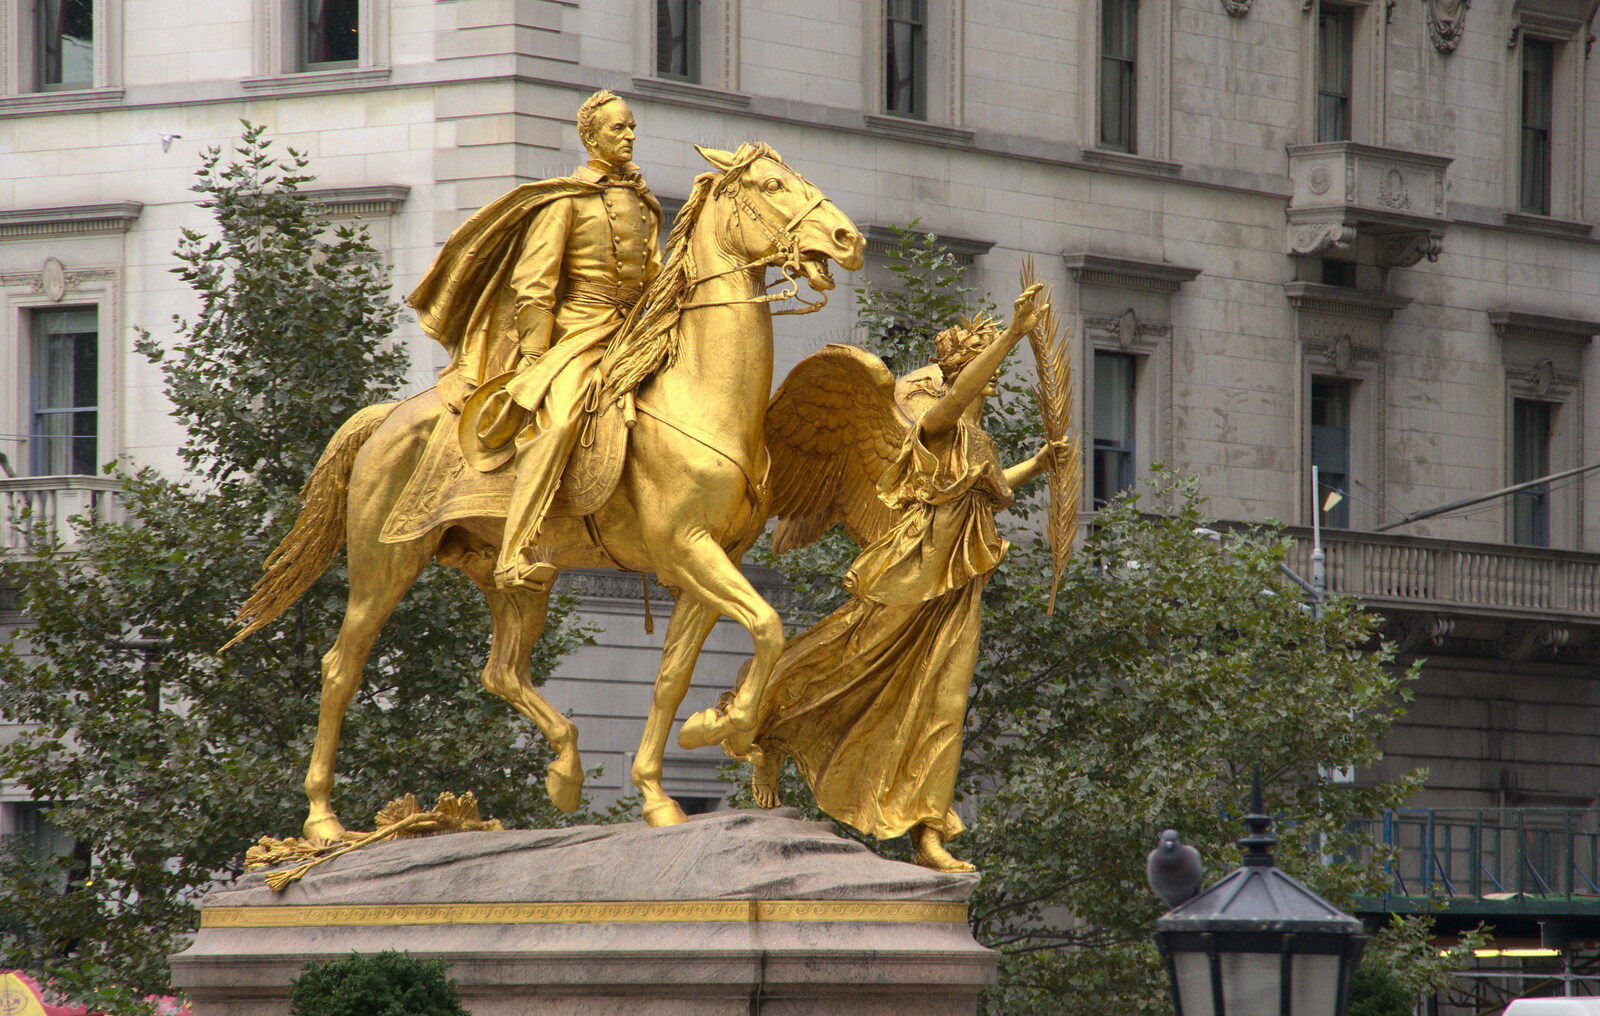 A very bright gold statue from Open-top Buses and a Day at the Museum, New York, United States - 22nd October 2018